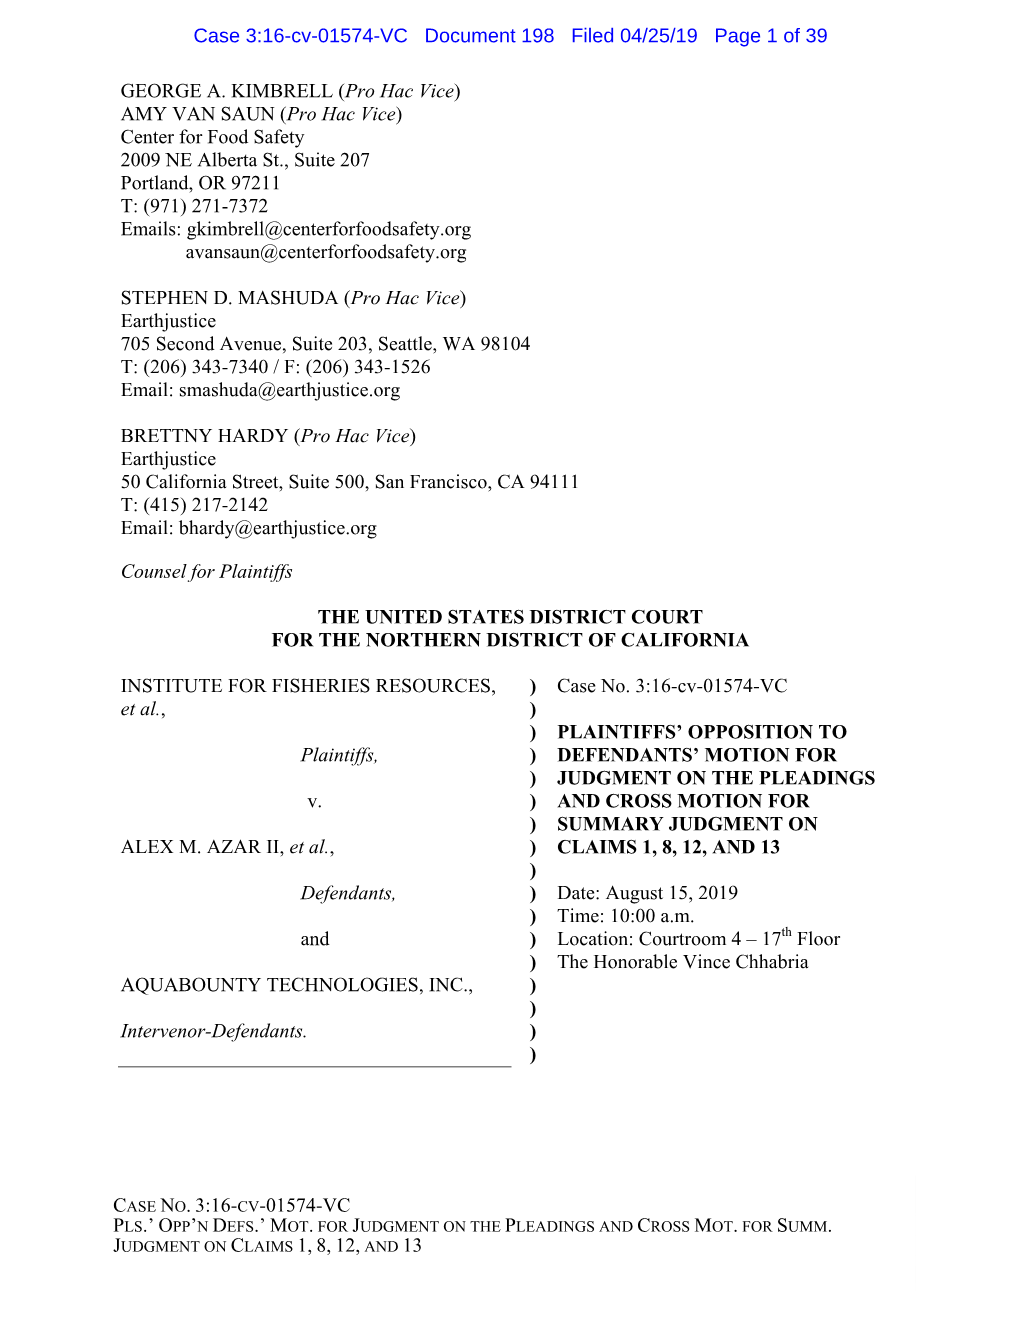 Case 3:16-Cv-01574-VC Document 198 Filed 04/25/19 Page 1 of 39